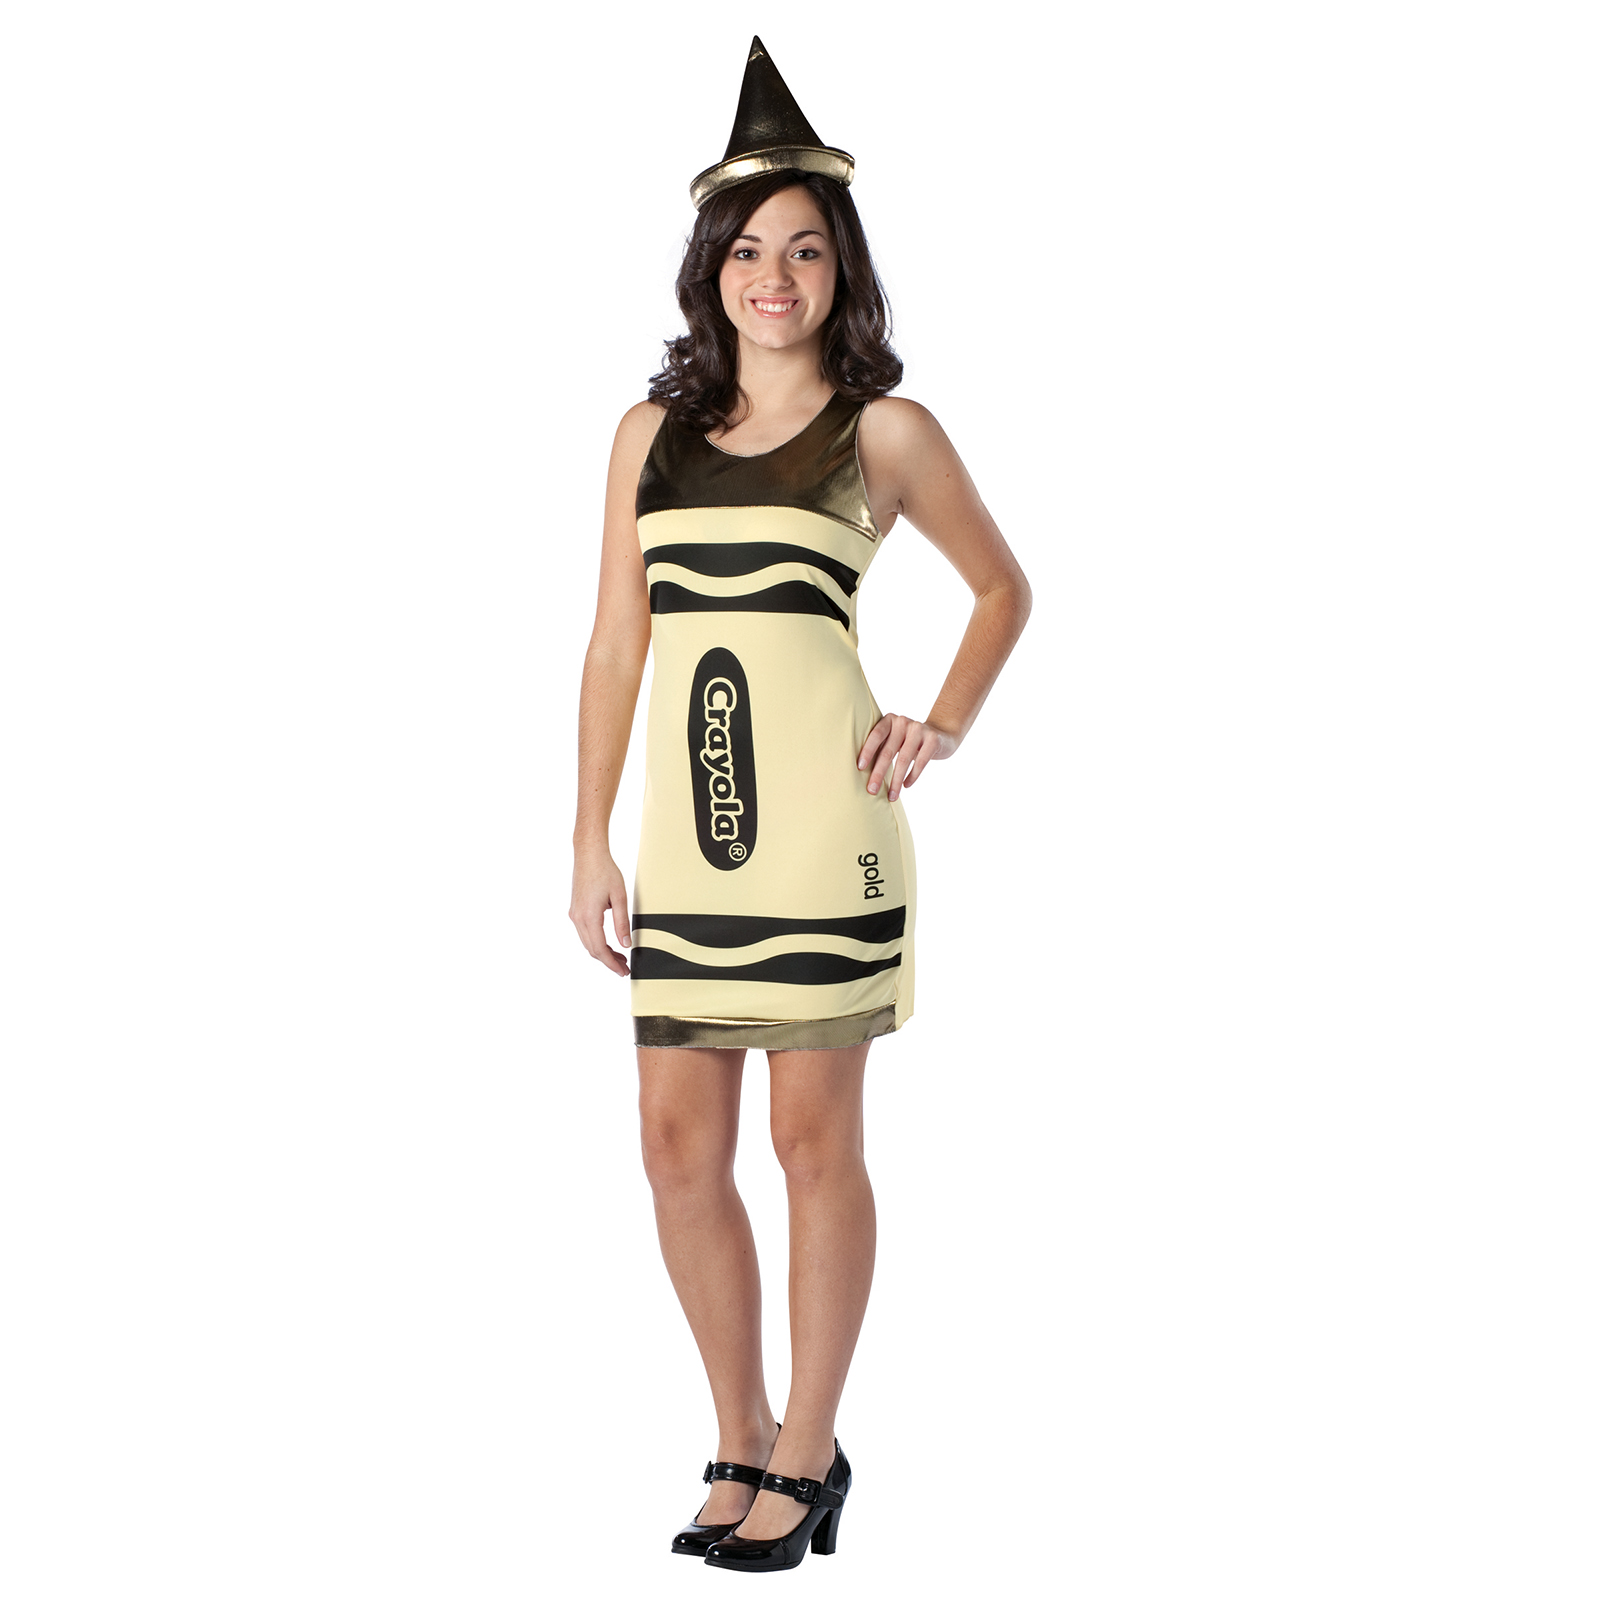 Crayola Gold Dress Teen Size: One Size Fits Most